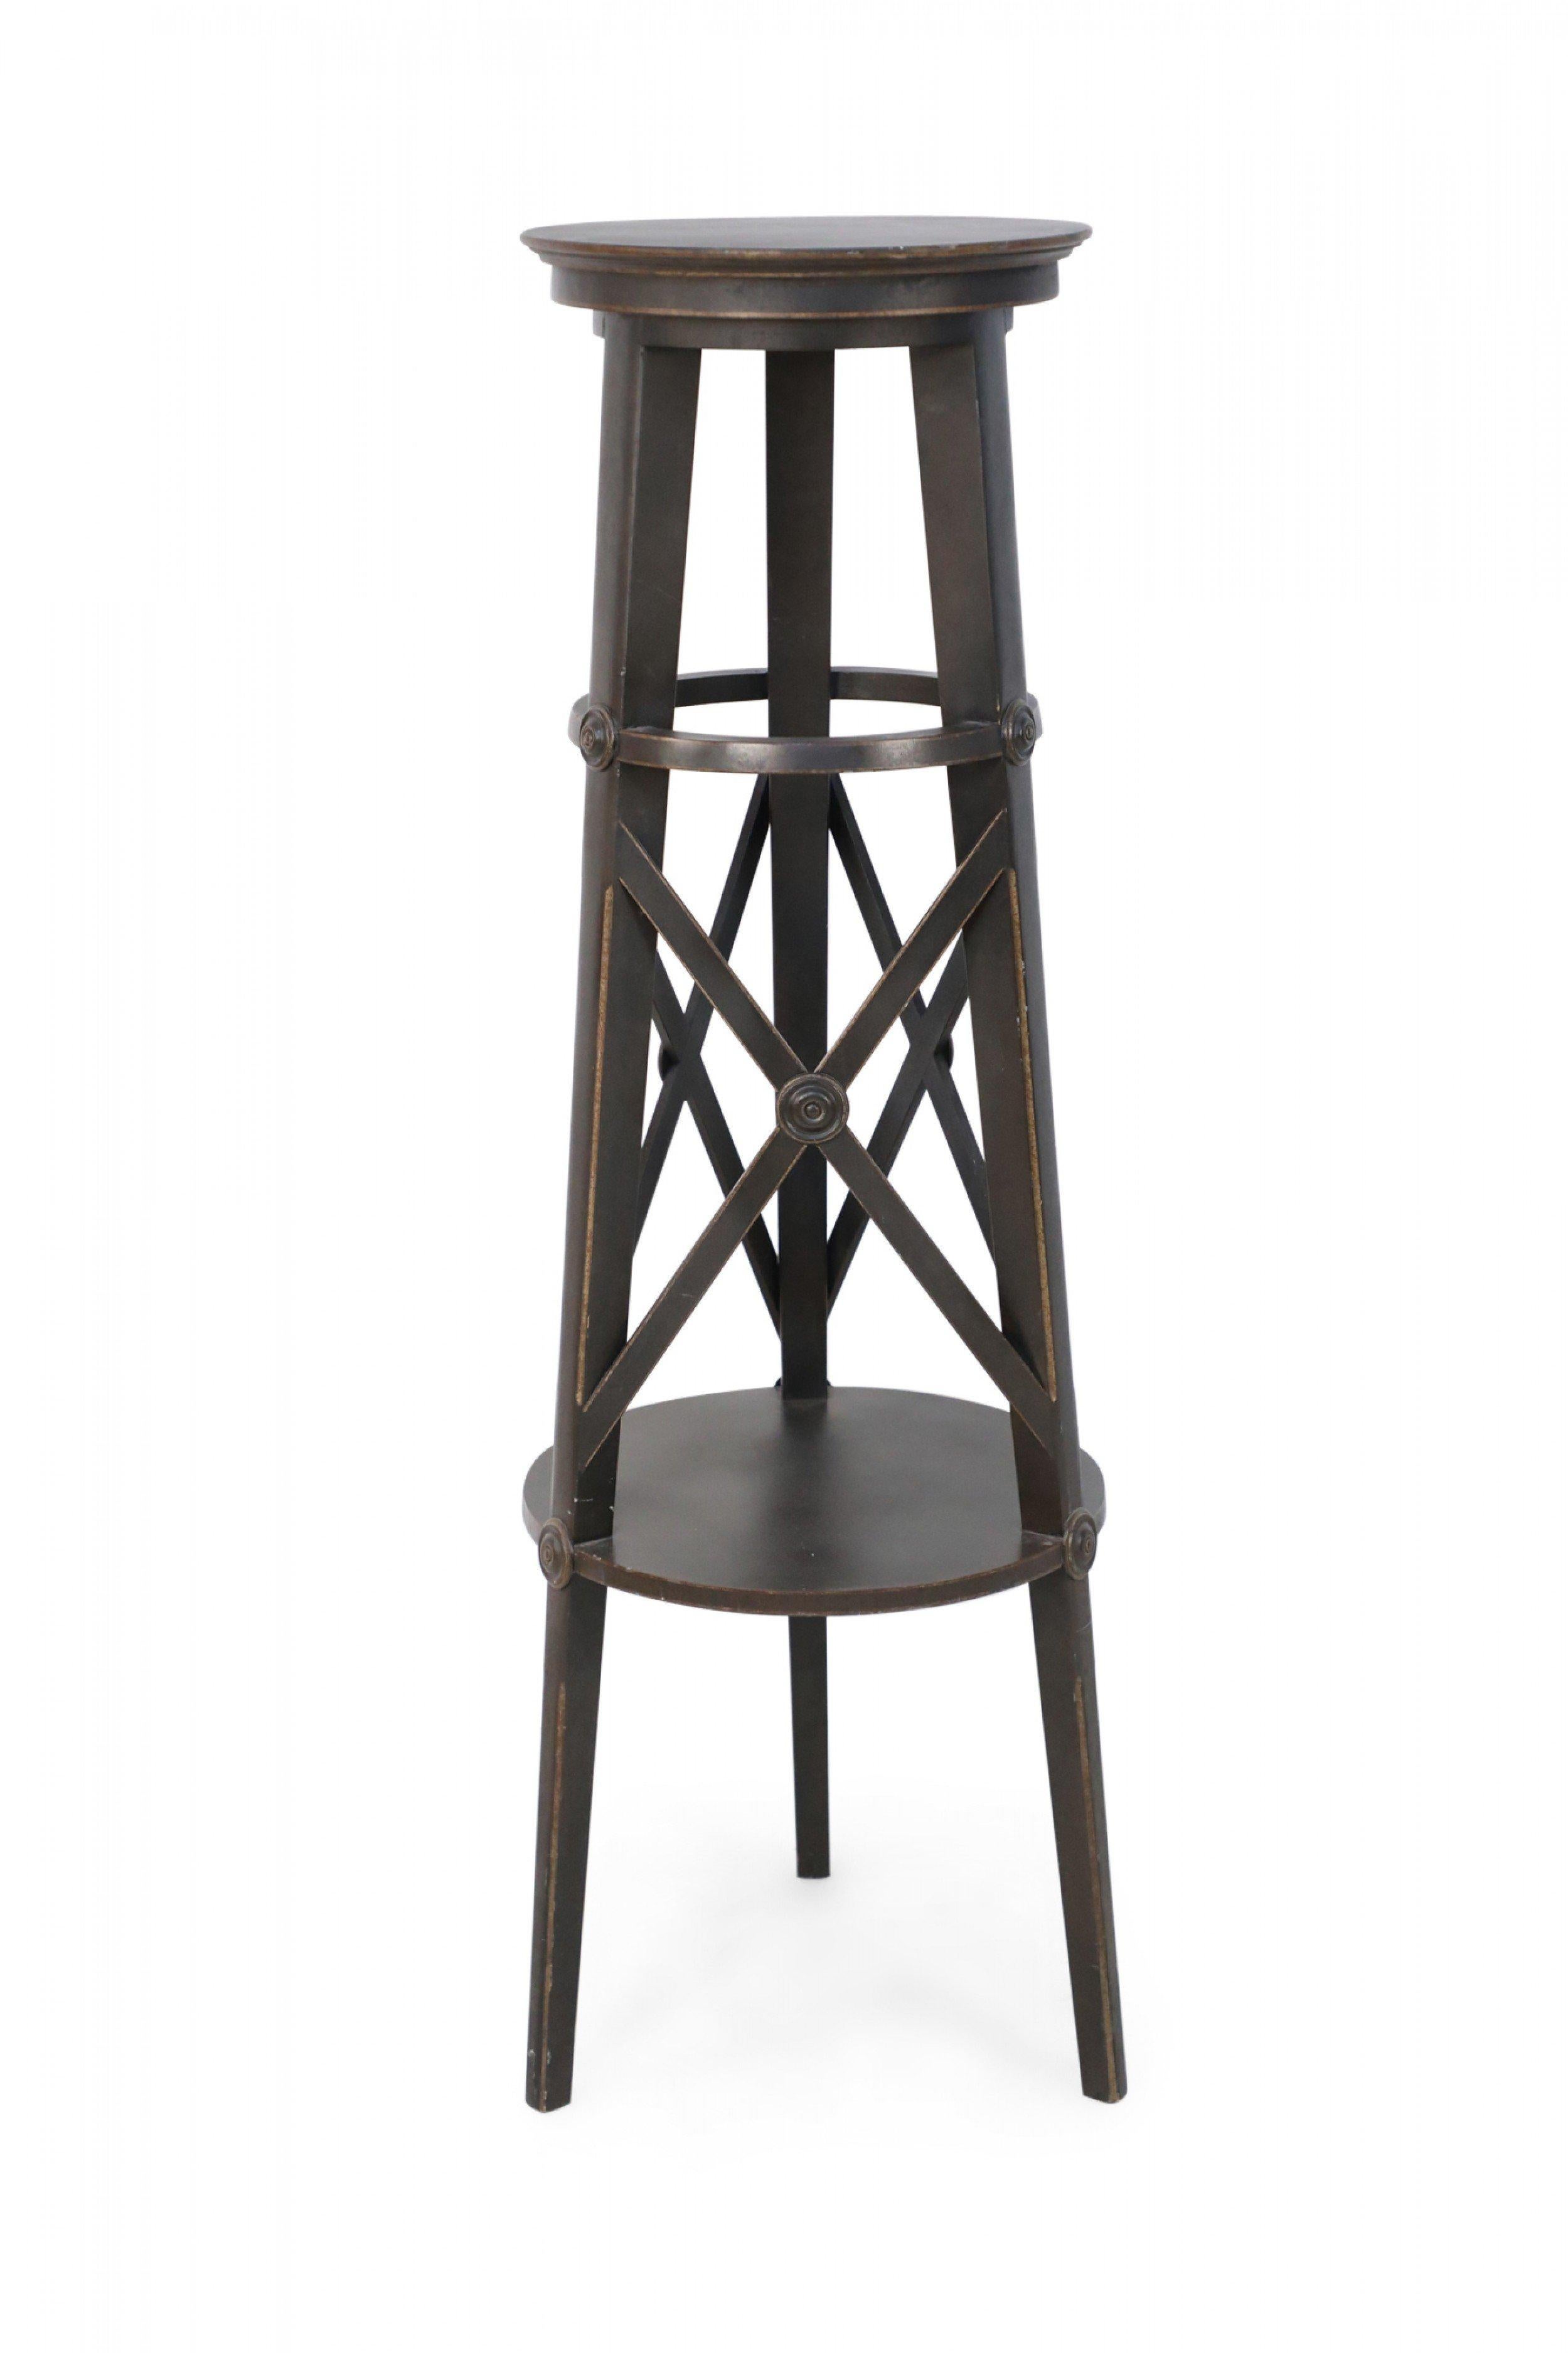 Pair of tall circular brown painted wooden pedestals with top and bottom shelves connected by three legs with x-shaped supports, featuring carved circular medallions to emphasize where the lines intersect. (priced as pair).